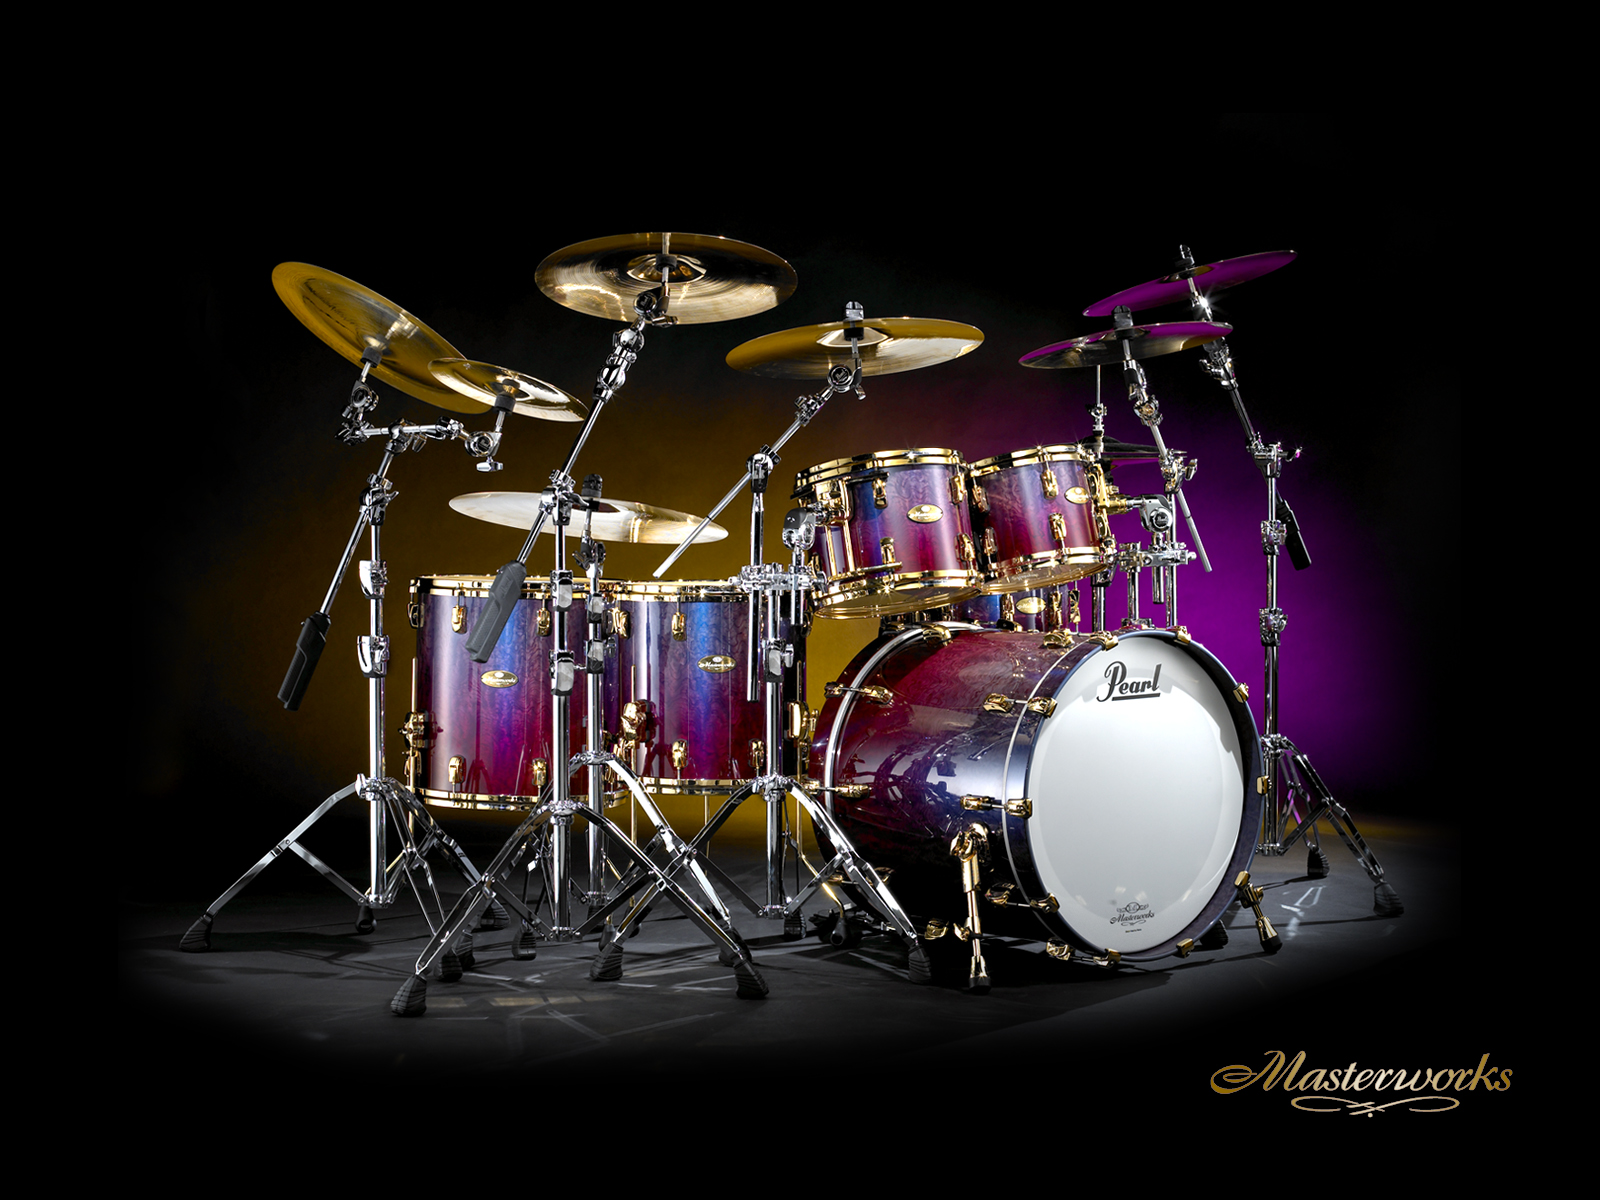 Top Yamaha Drums Wallpaper Image For